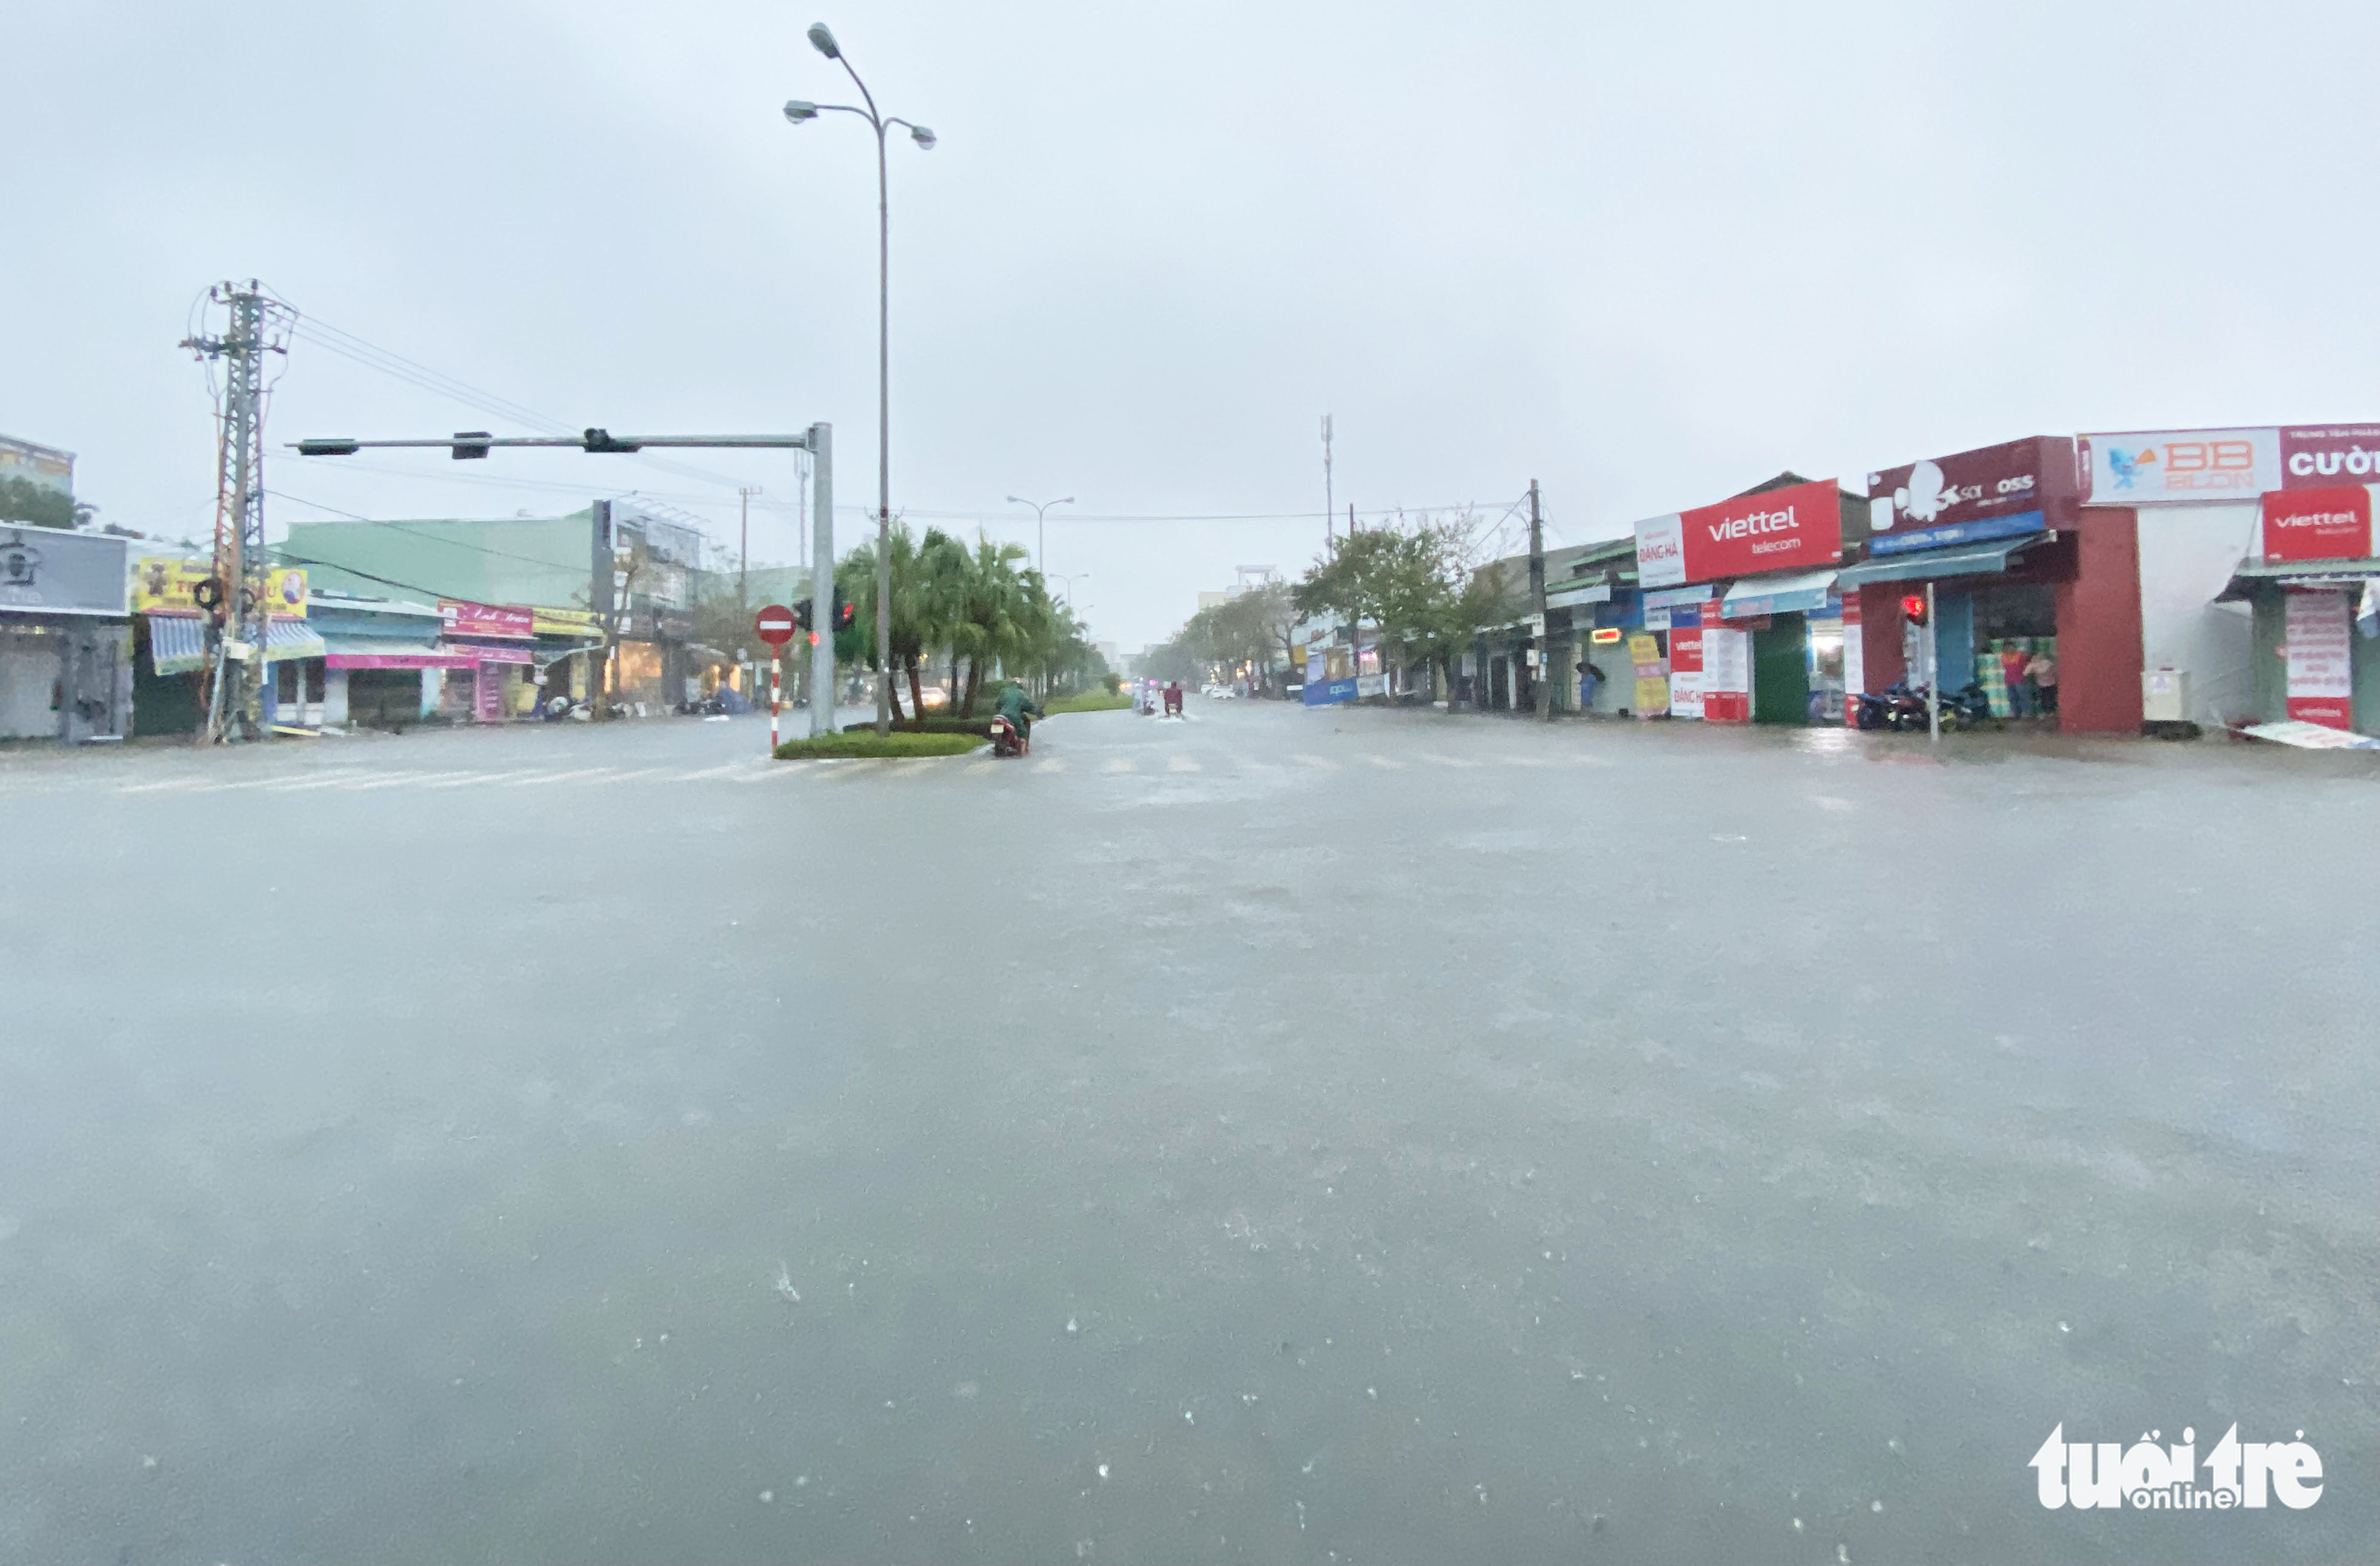 Flooding occurs on Hung Vuong Street in Tam Ky City, Quang Nam Province, Vietnam, October 10, 2022. Photo: Le Trung / Tuoi Tre